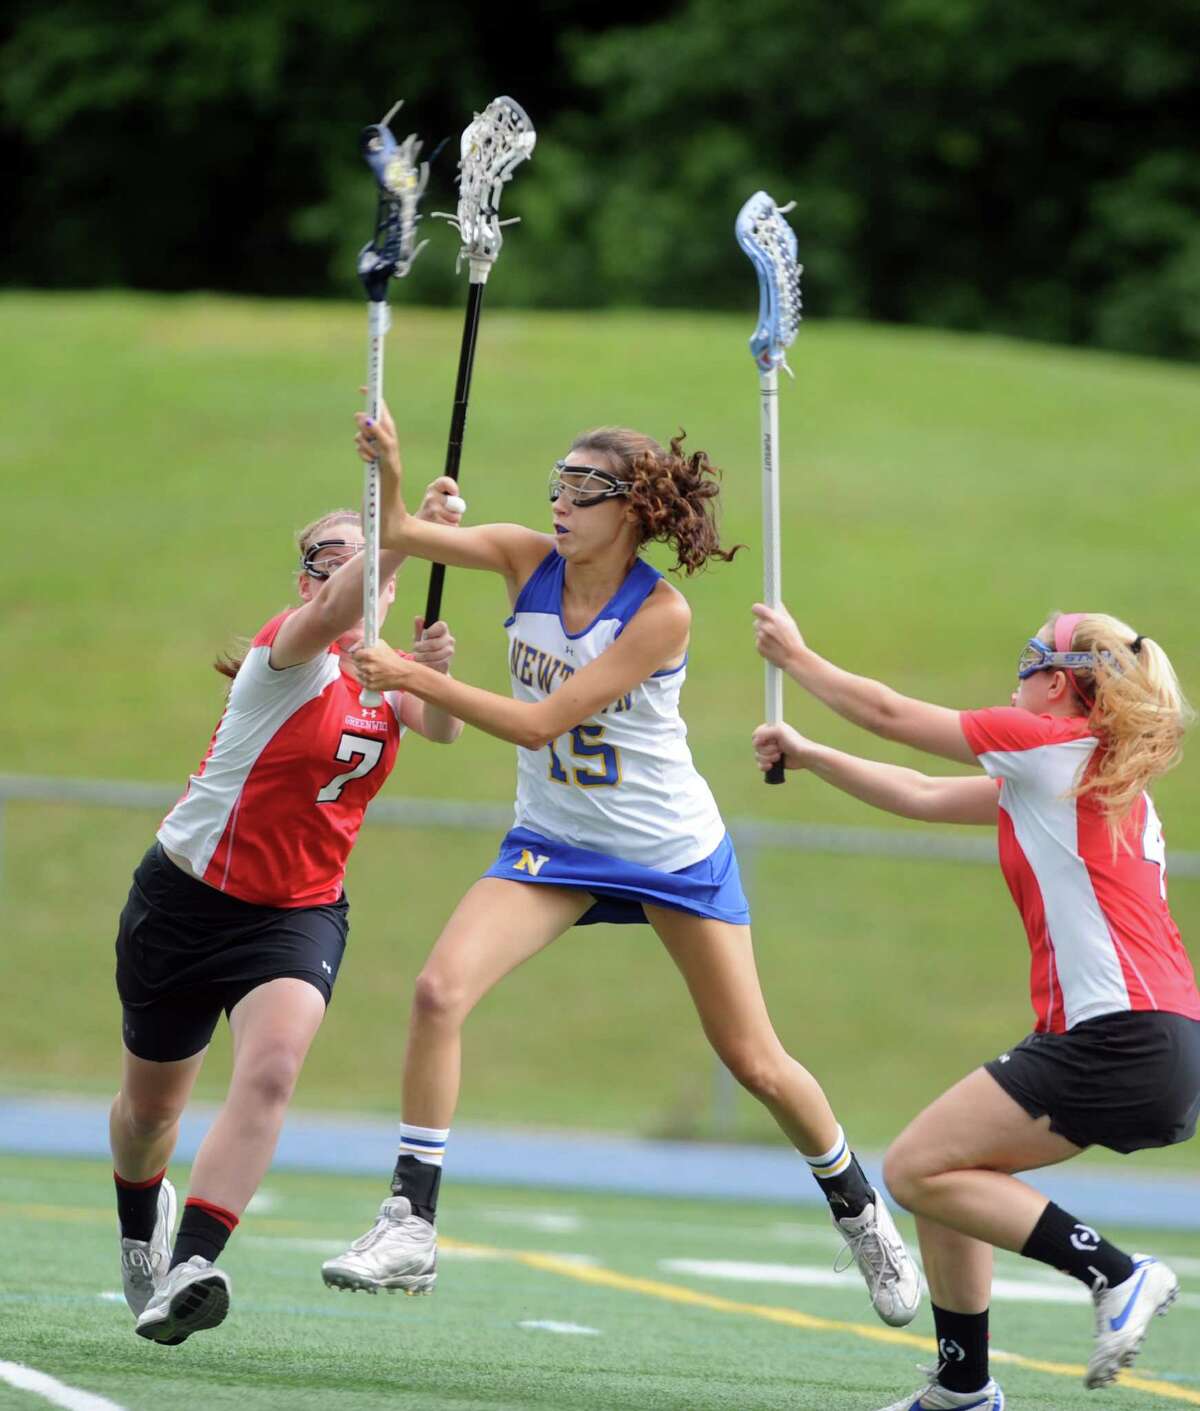 Newtown's Erin Kenning takes a shot on goal as Greenwich's defenders Shannon Colligan, left, and Isabelle Mackell surround her during the Girls Lacrosse State Tournament Class L Semifinals Wednesday, June 6, 2012 at Bunnell High School in Stratford, Conn.